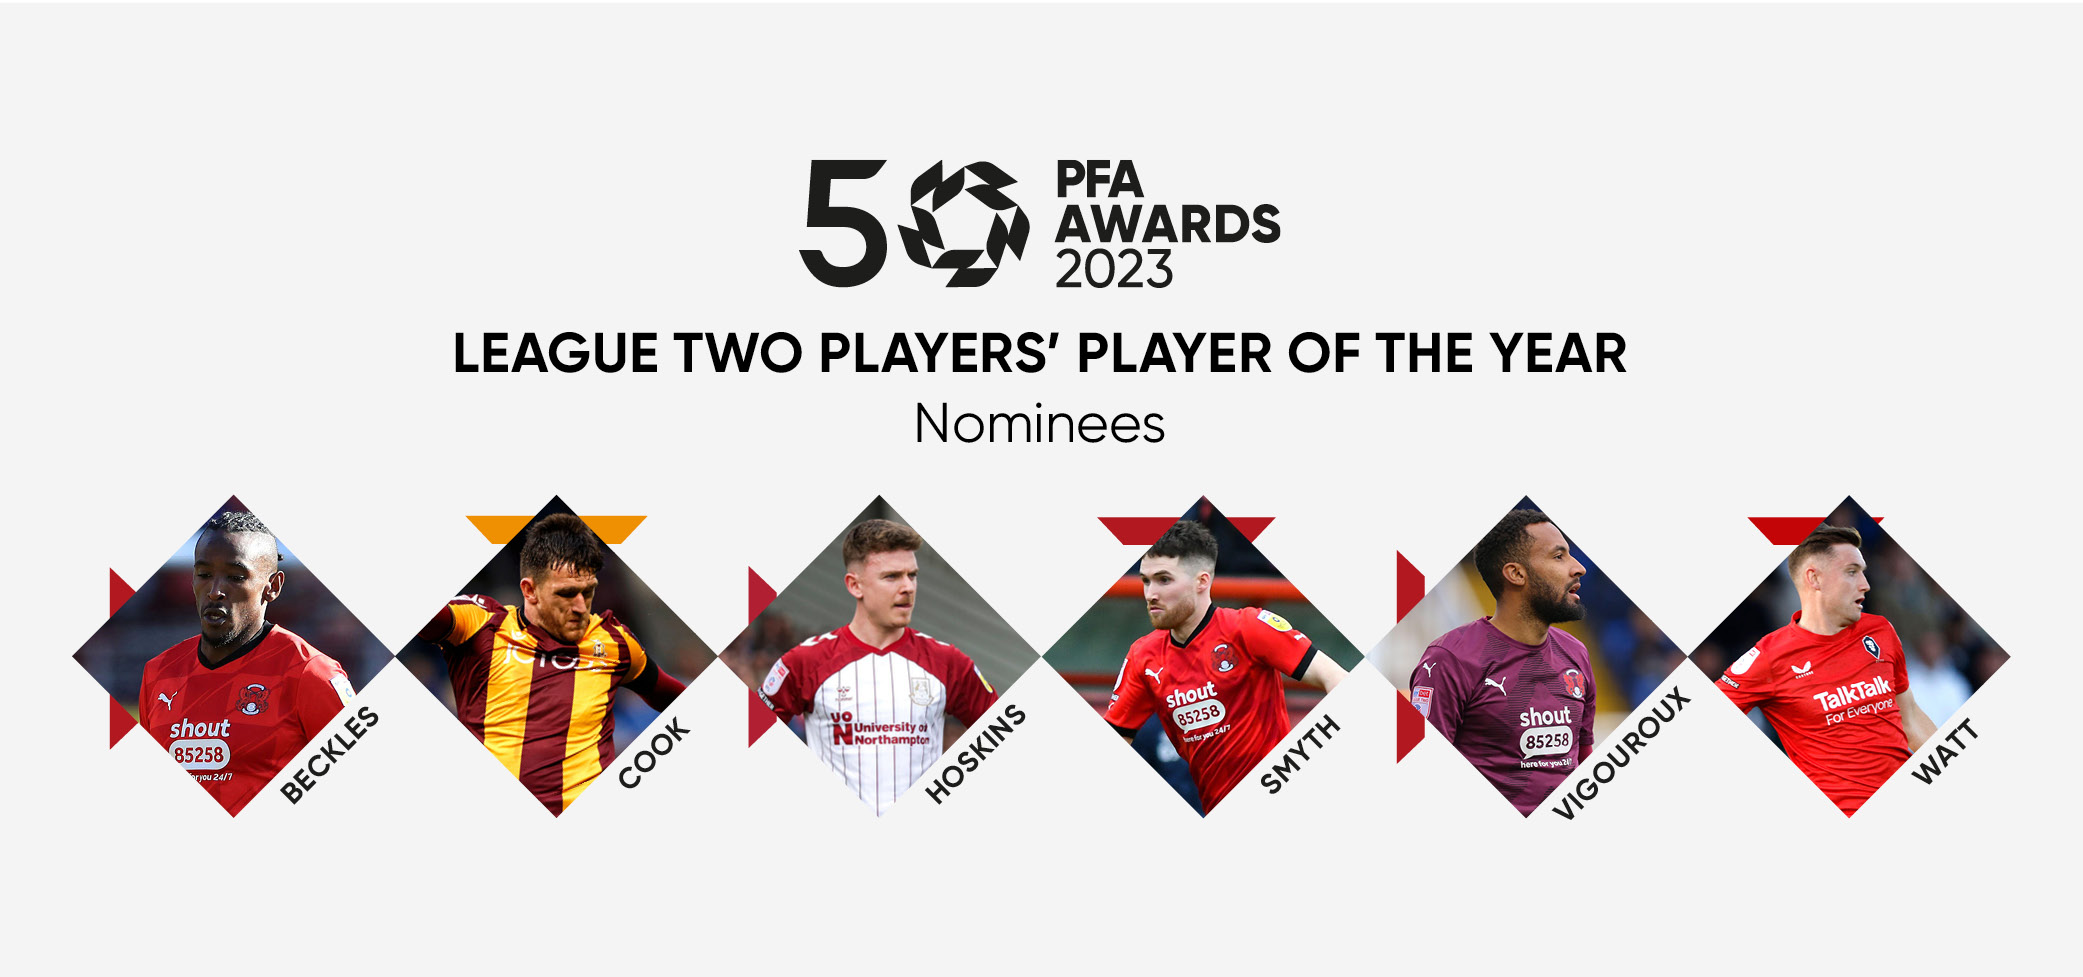 PFA League Two Players' Player of the Year Nominees